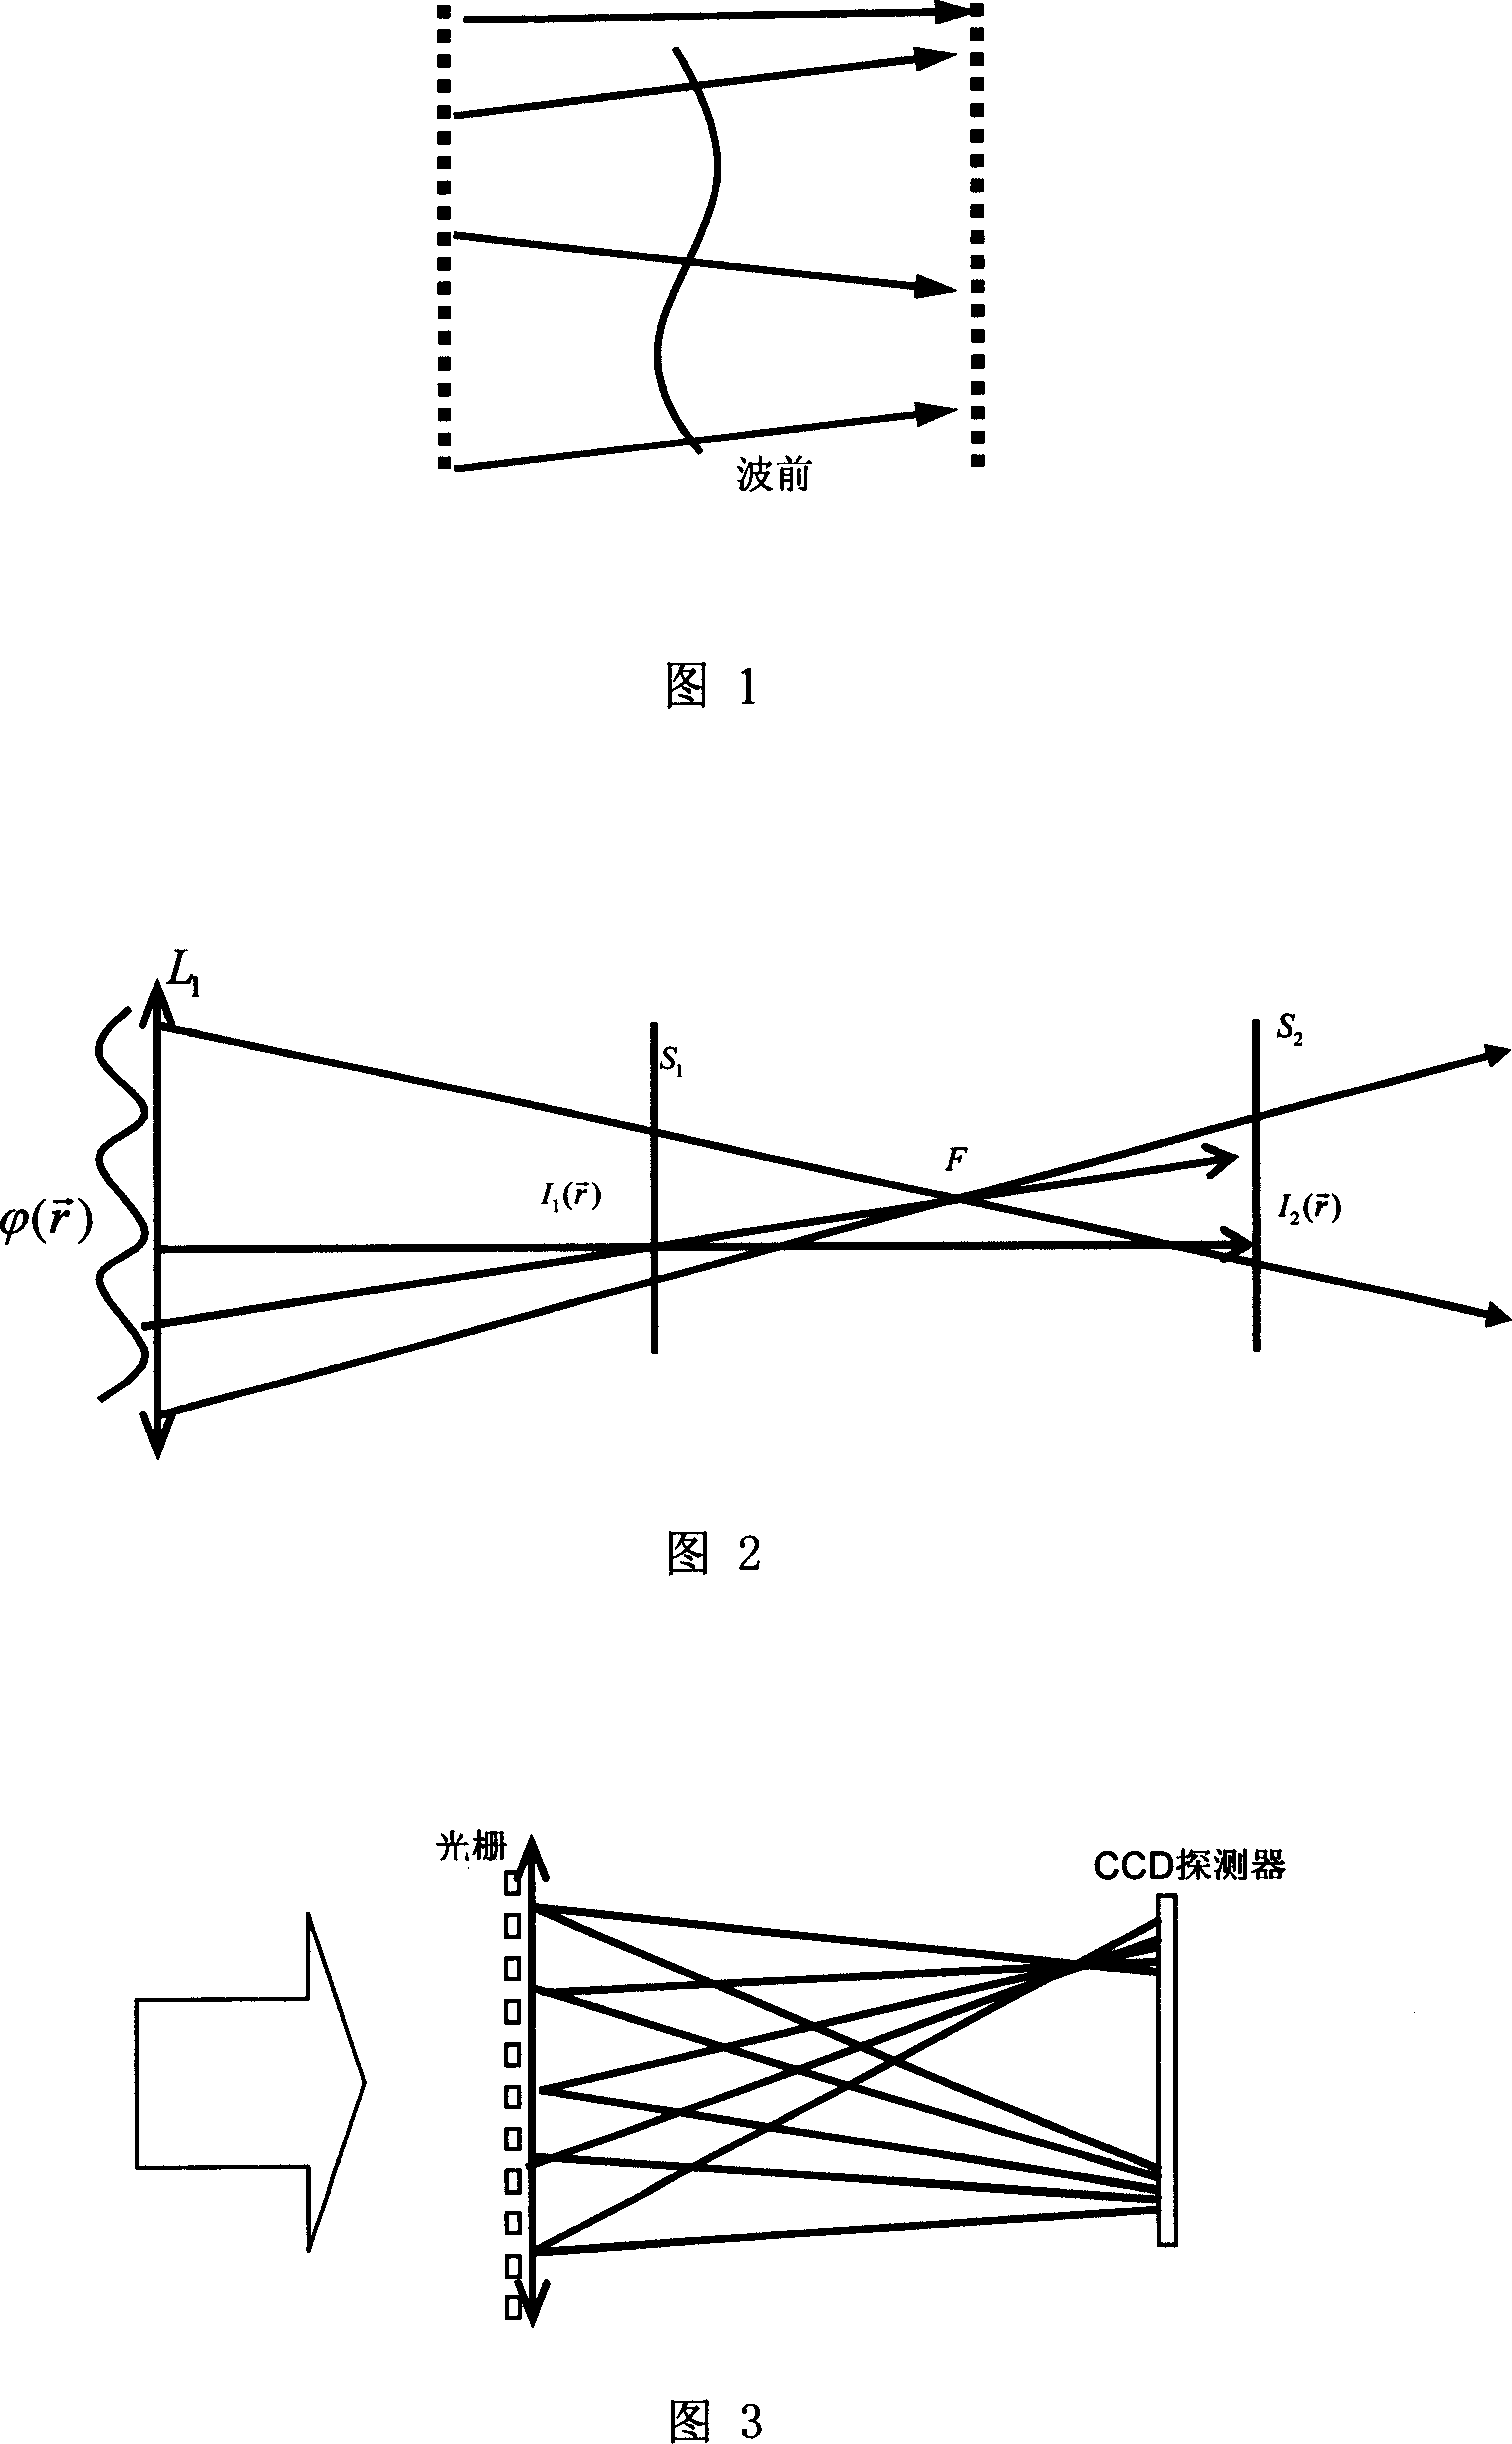 Method for measuring focus and equivalent f coefficient using optical grating type wave-front curvature sensing unit